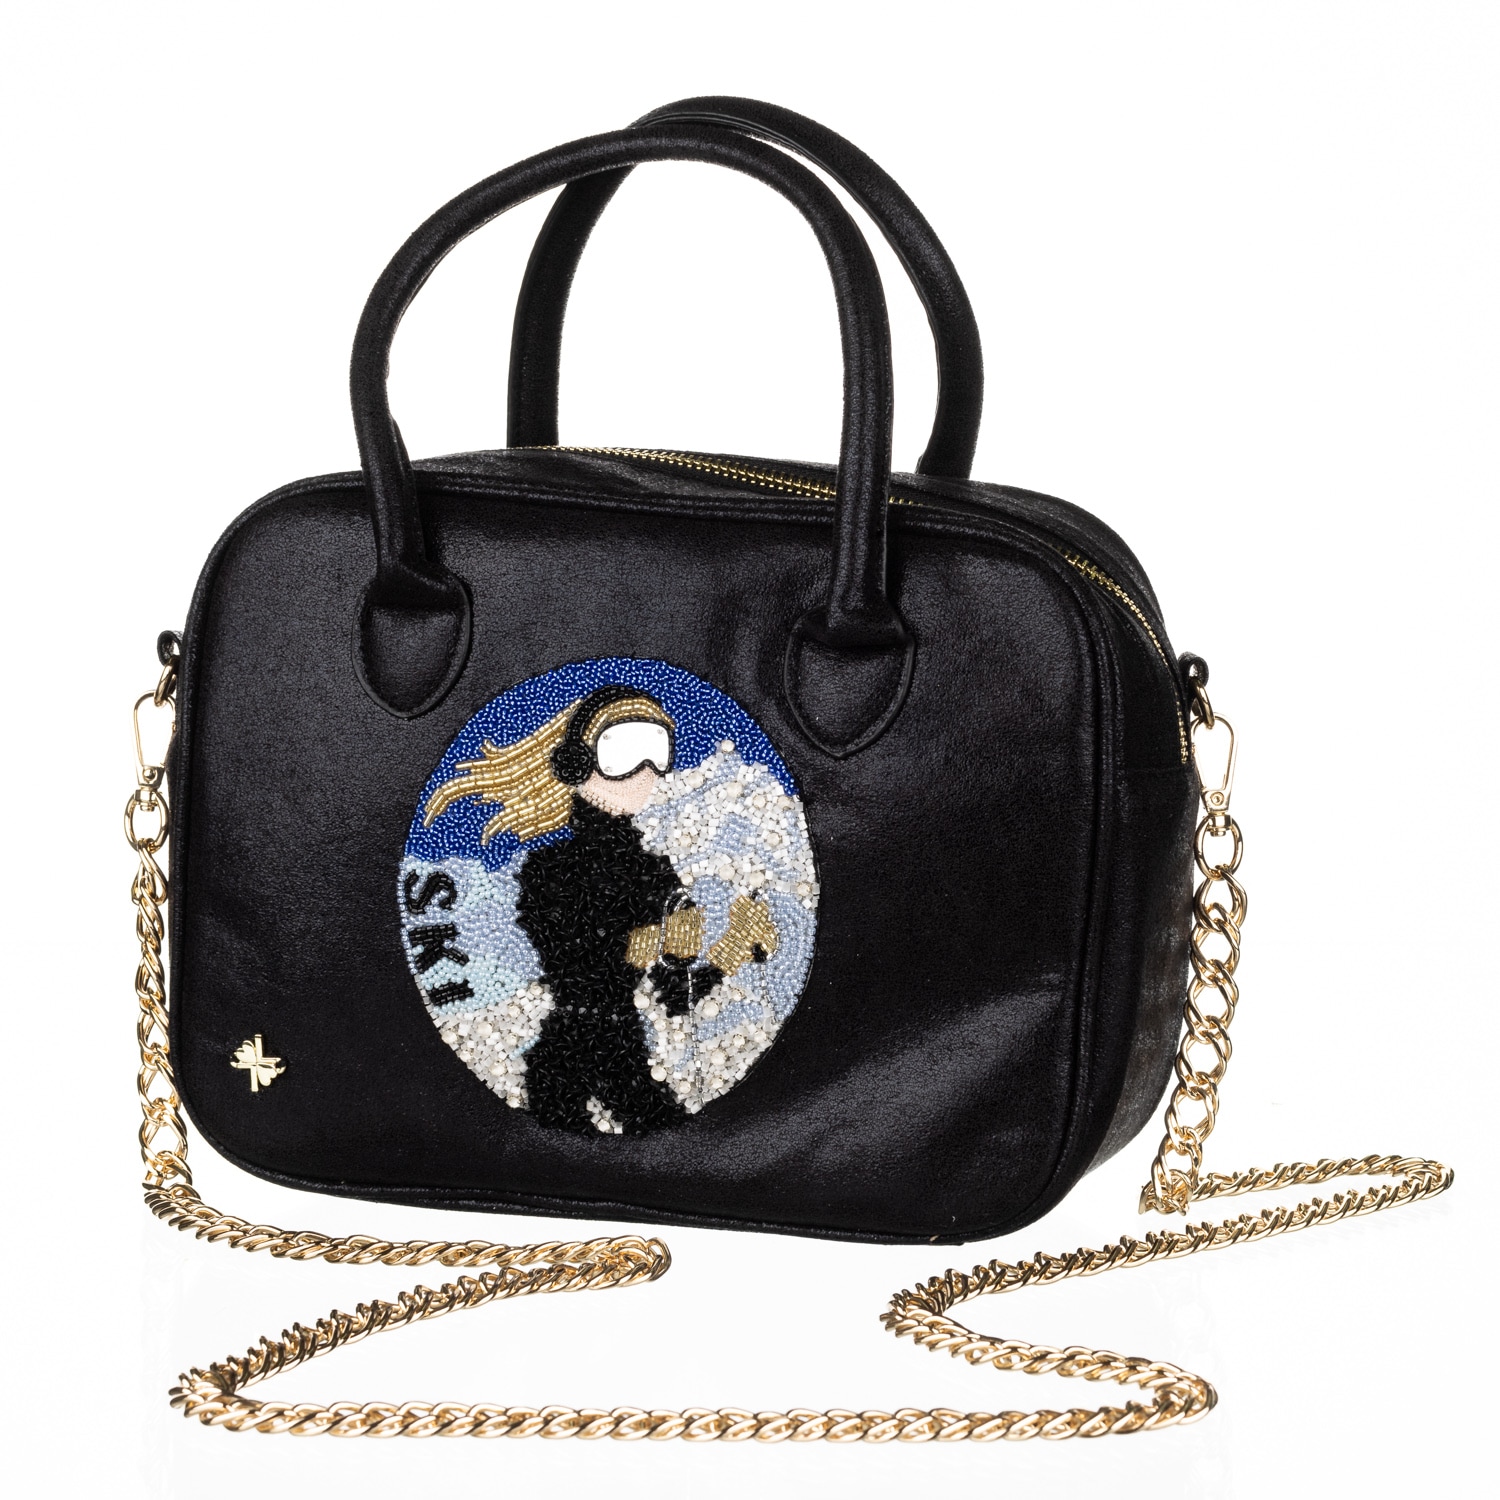 Women’s Laines London Couture Black Metallic Bag With Embellished Ski Girl